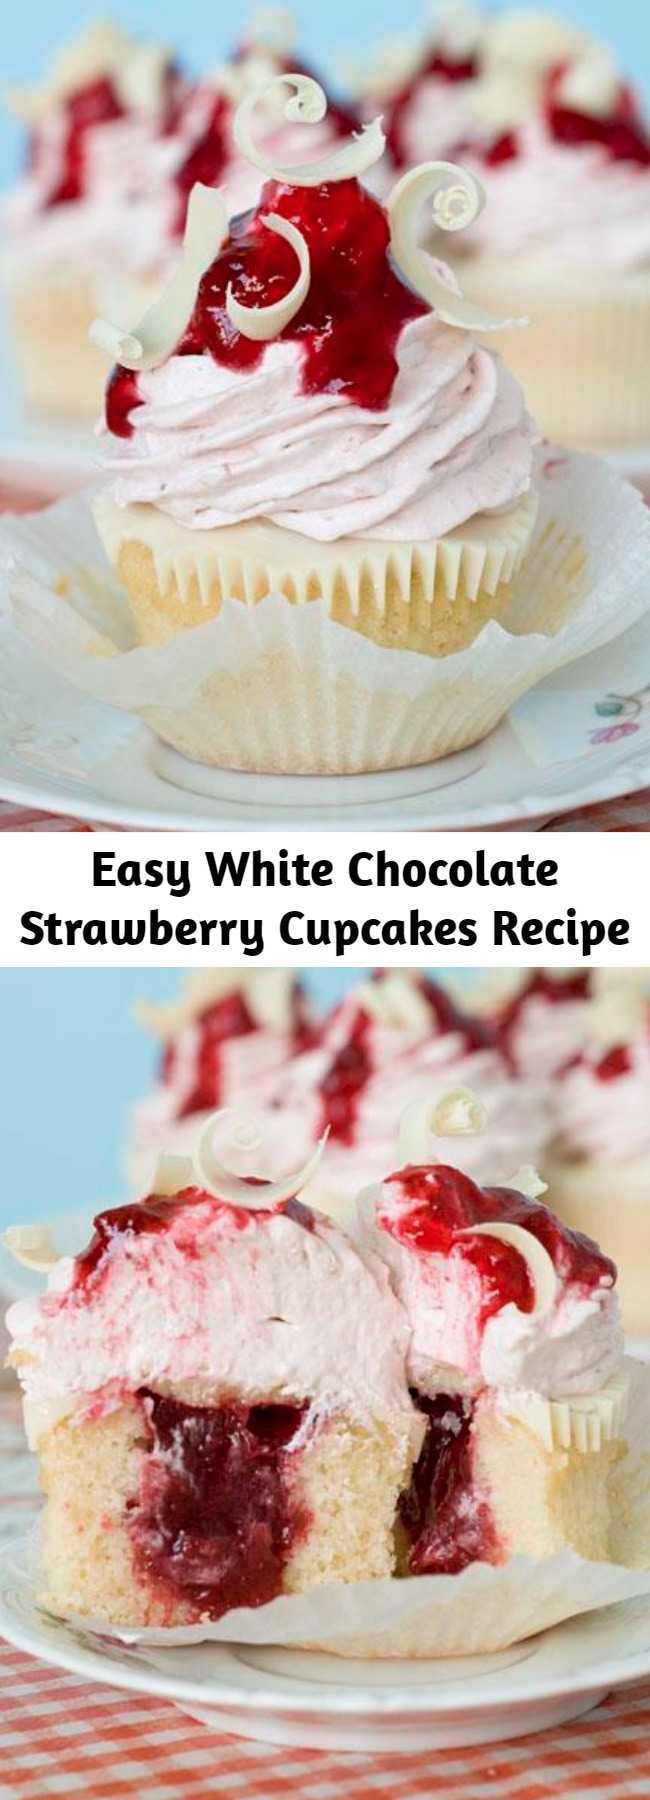 Easy White Chocolate Strawberry Cupcakes Recipe - White Chocolate Strawberry Cupcakes are moist and dense vanilla cupcakes with strawberry filling! Top these decadent cupcakes with a layer of melted white chocolate and some strawberry-white chocolate cream cheese frosting. You won’t believe your taste buds when you try these sweet strawberry cupcakes with jam!